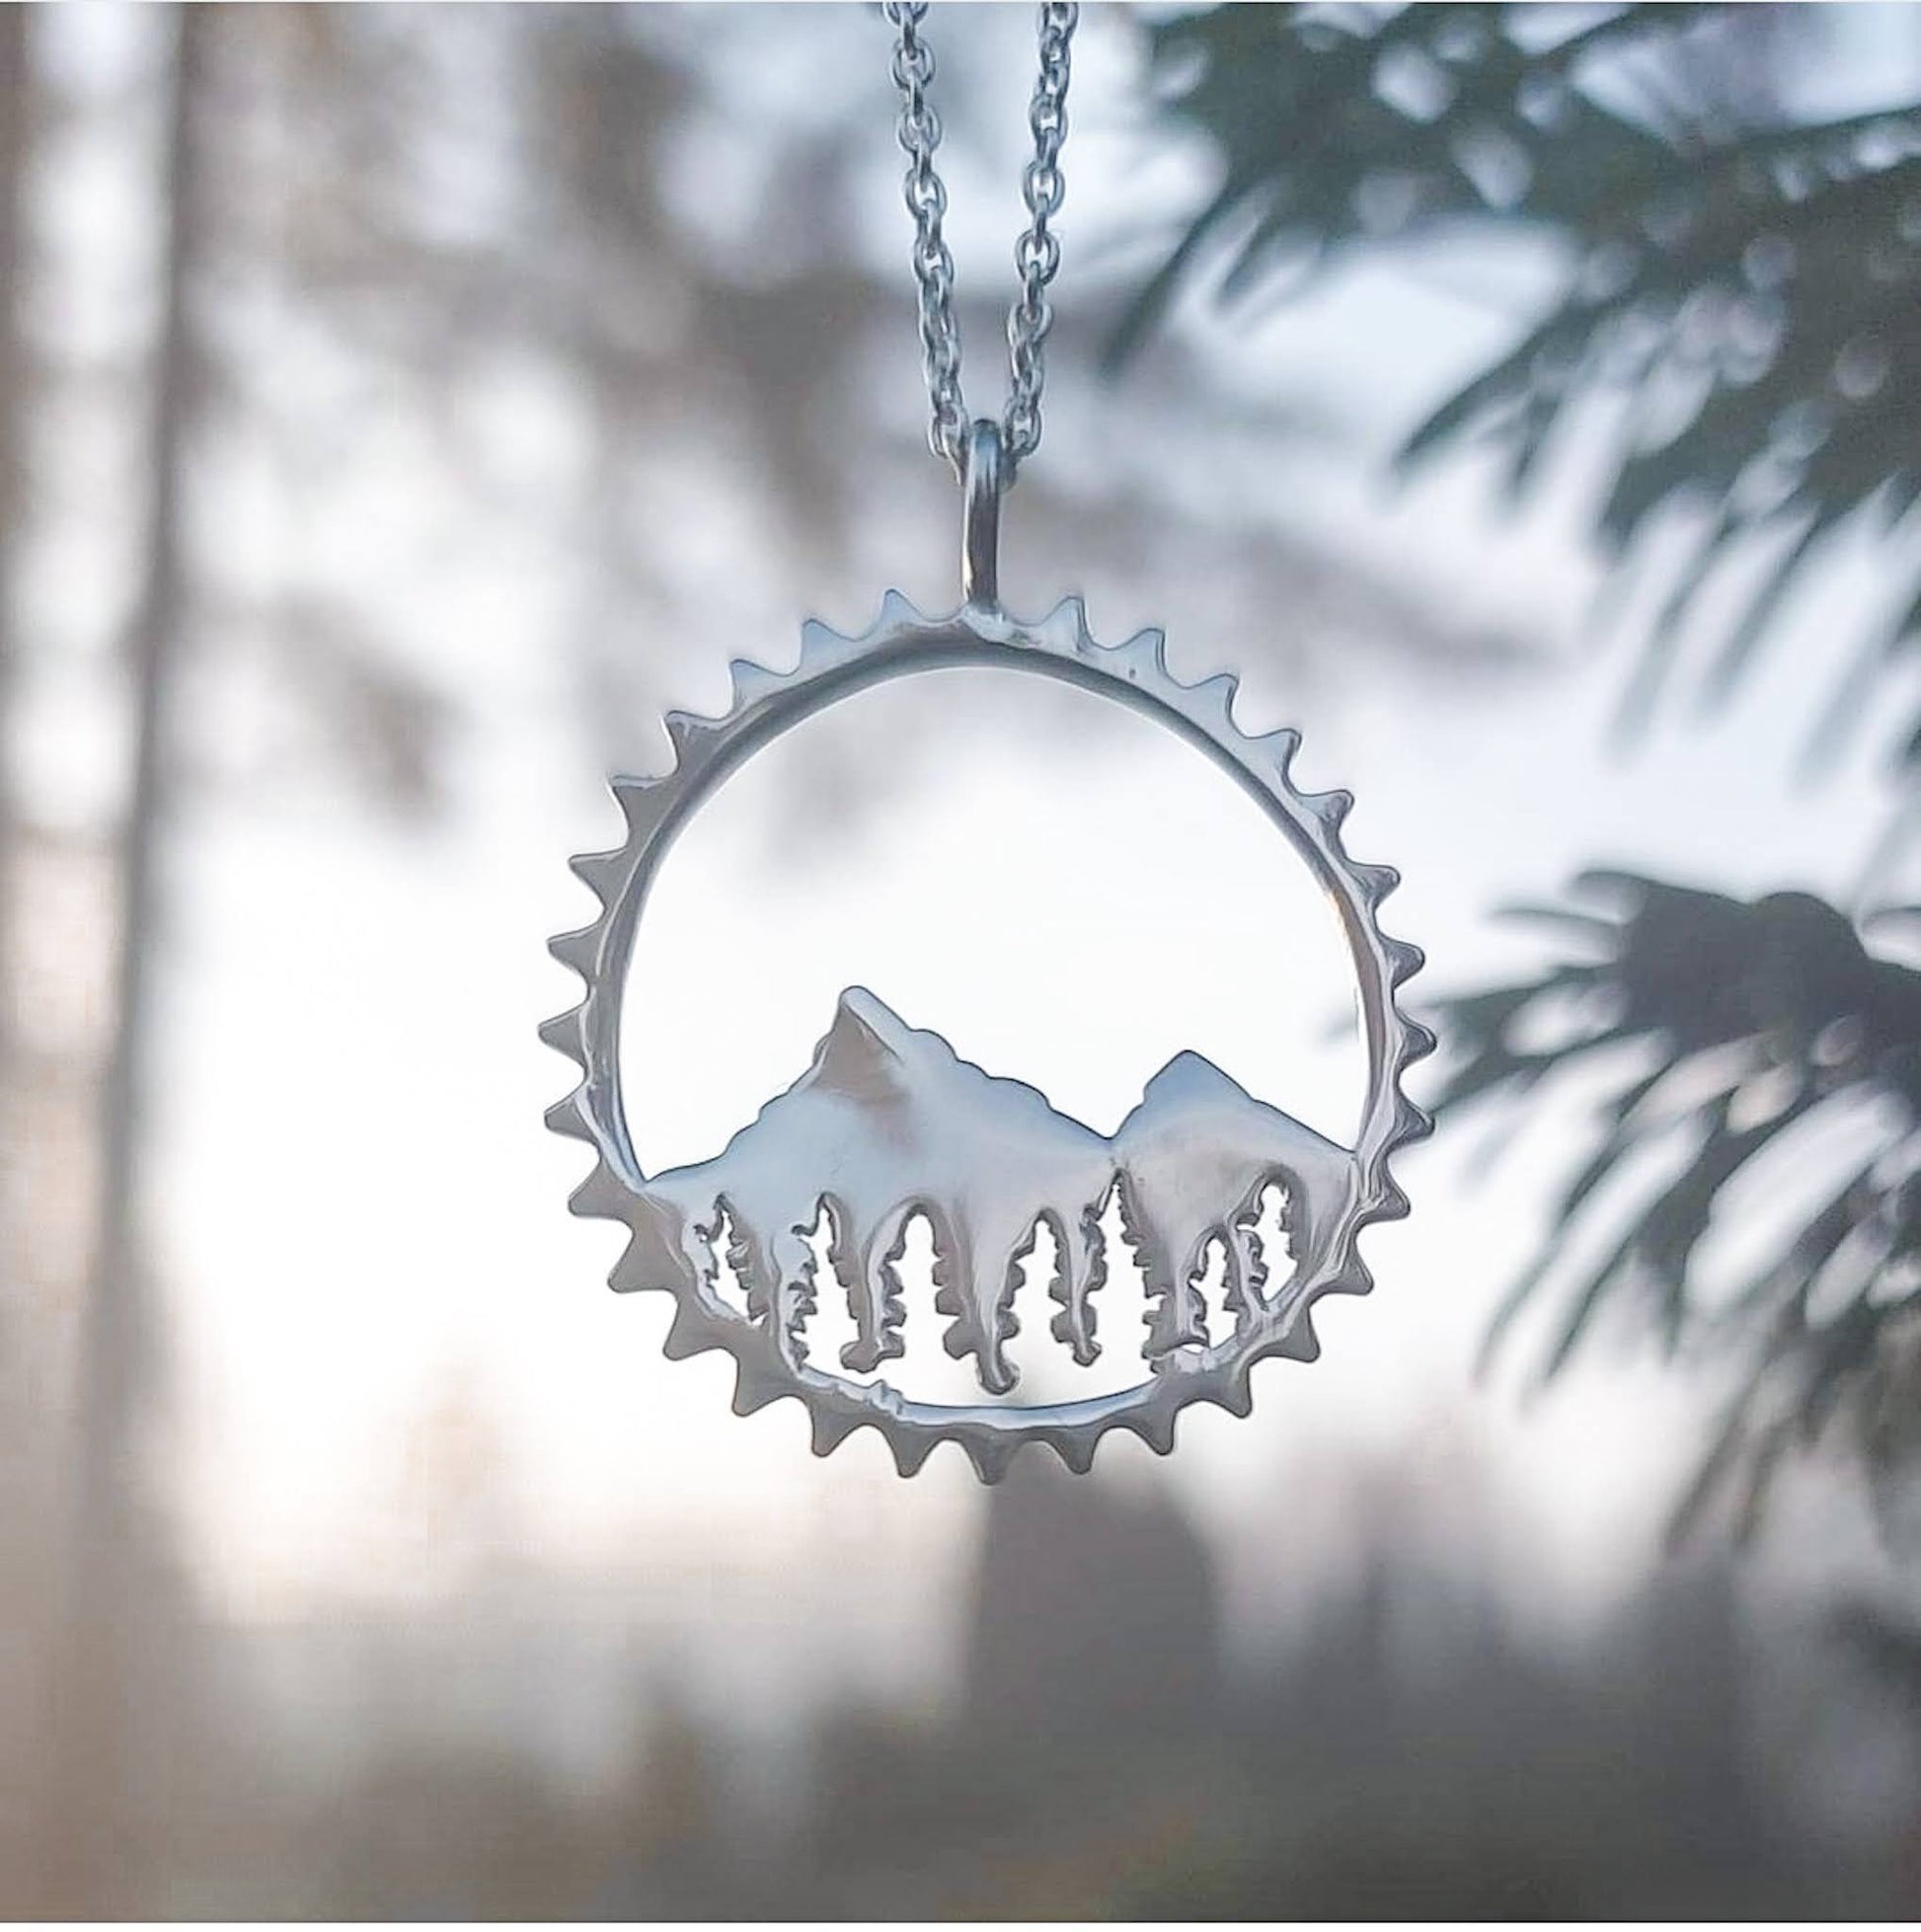 925 sterling silver Amore mountain bike themed pendant shown in front of foggy sunrise with evergreen trees